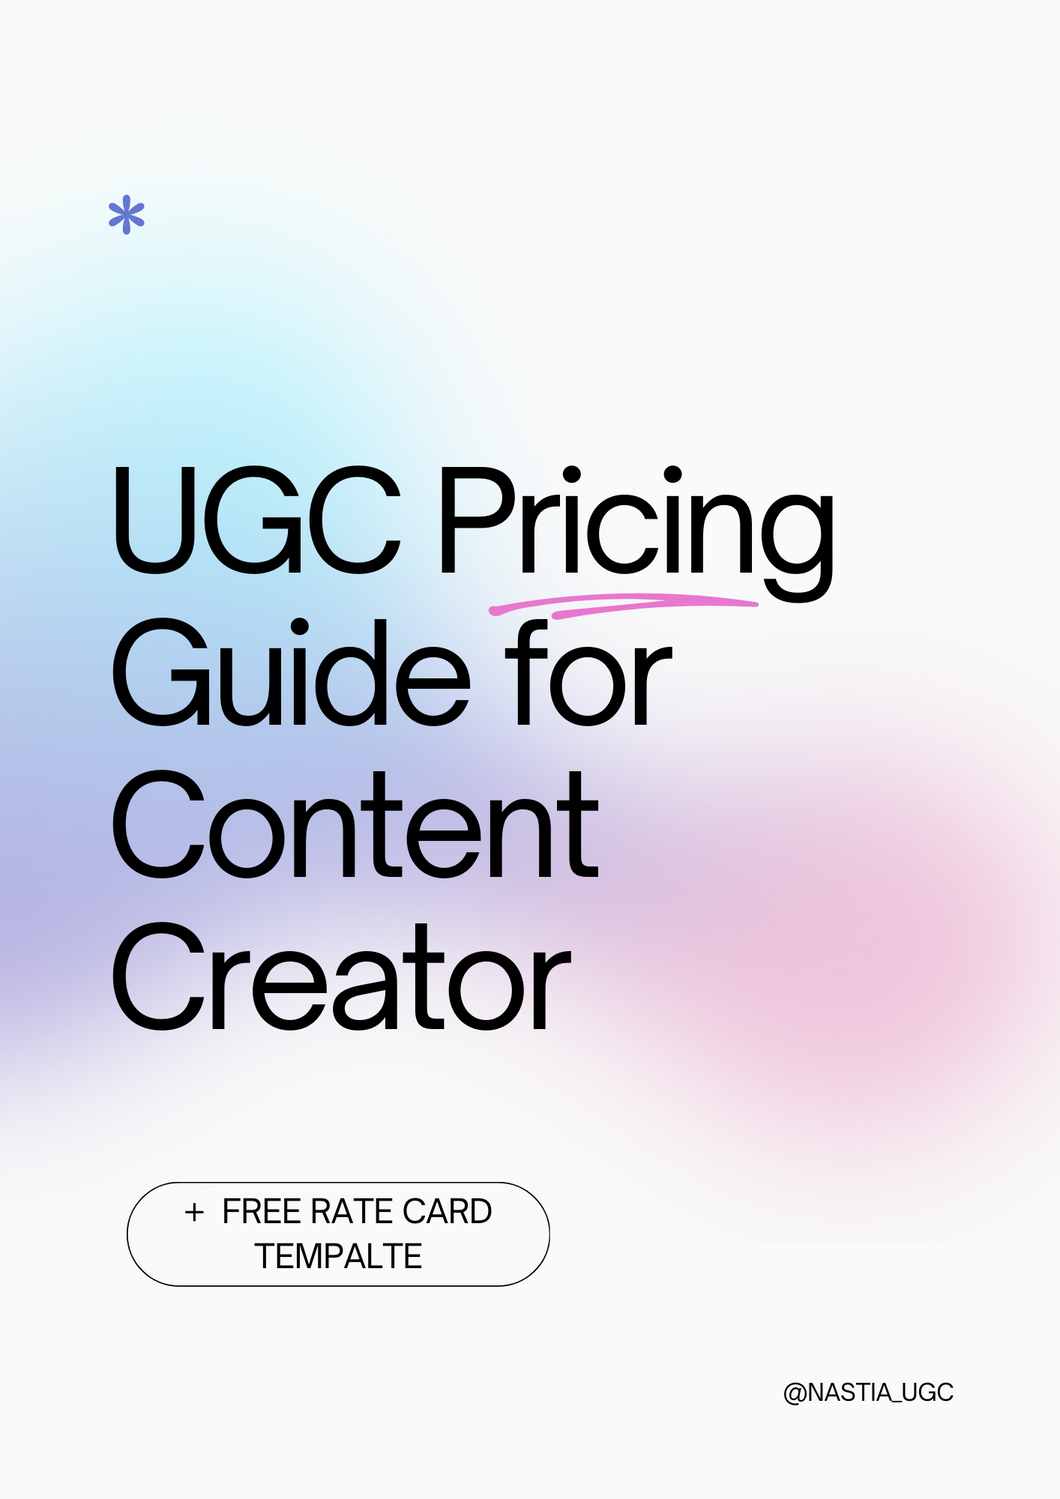 UGC Pricing Guide for Content Creators - FREE Rate Card Template